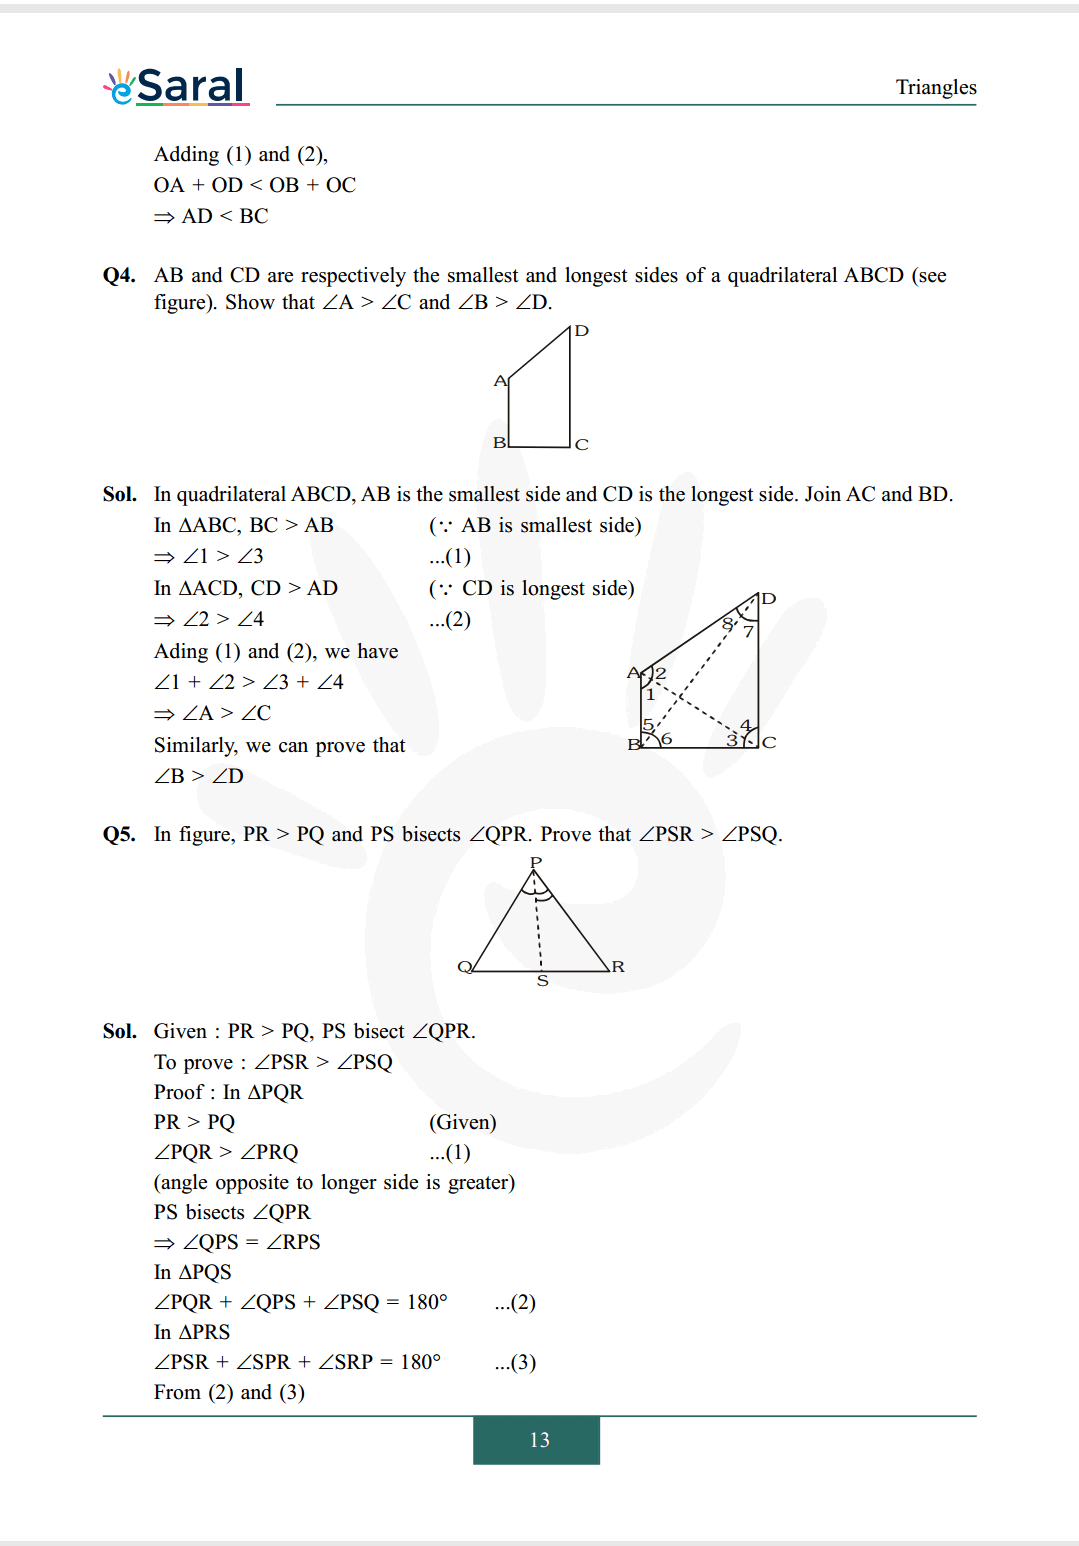 Class 9 maths chapter 7 exercise 7.4 solutions Image 2